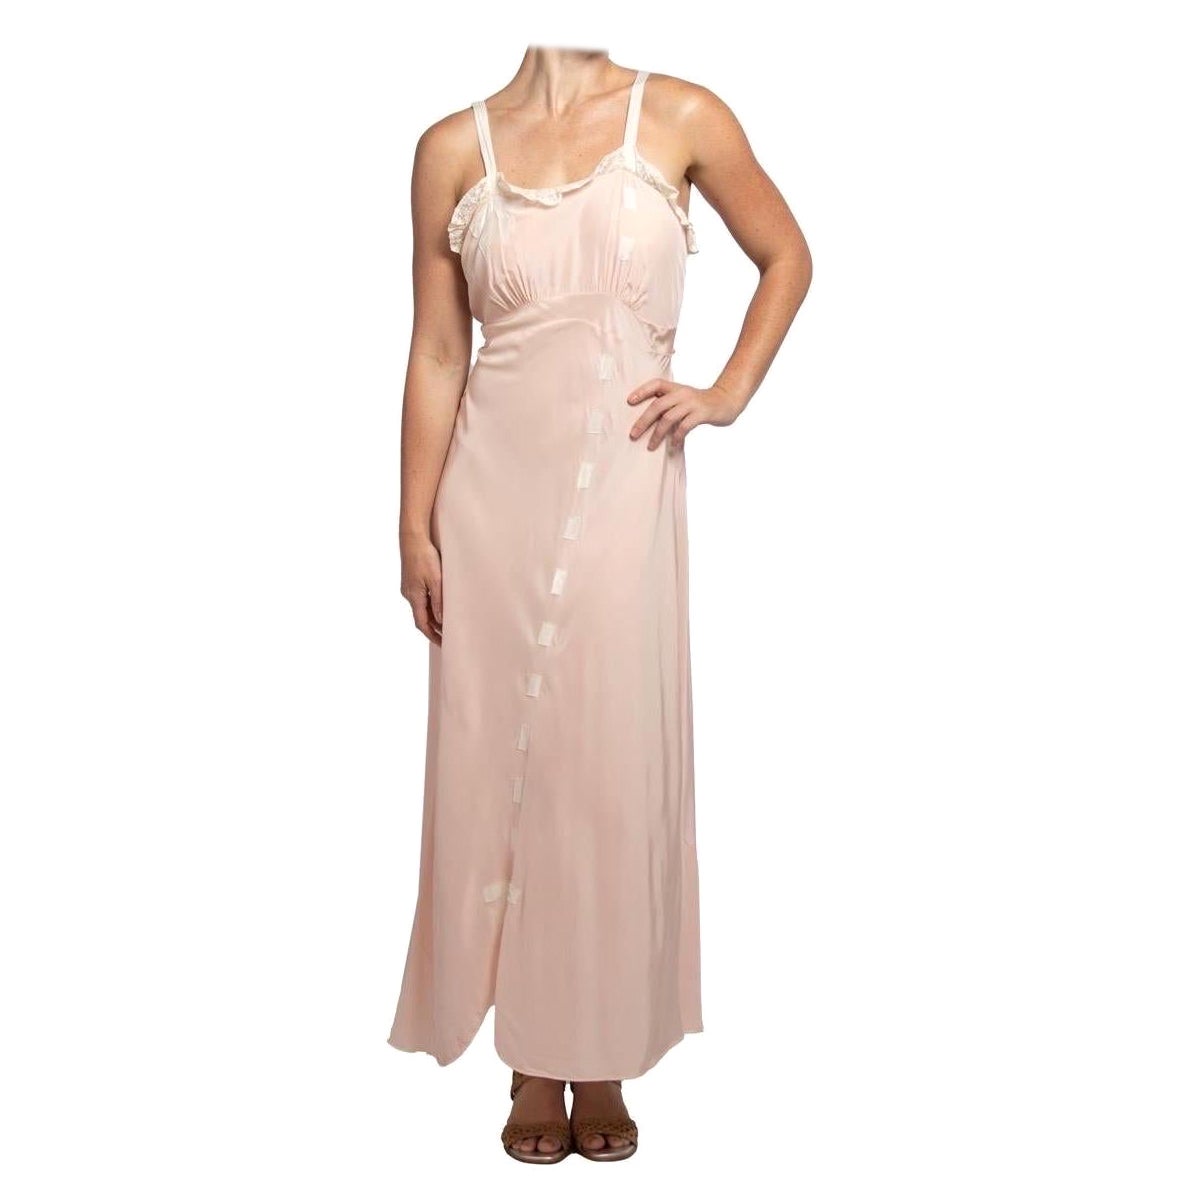 1940S Light Pink Bias Cut Rayon With Applique Negligee Lace Trim And Bow Detail For Sale